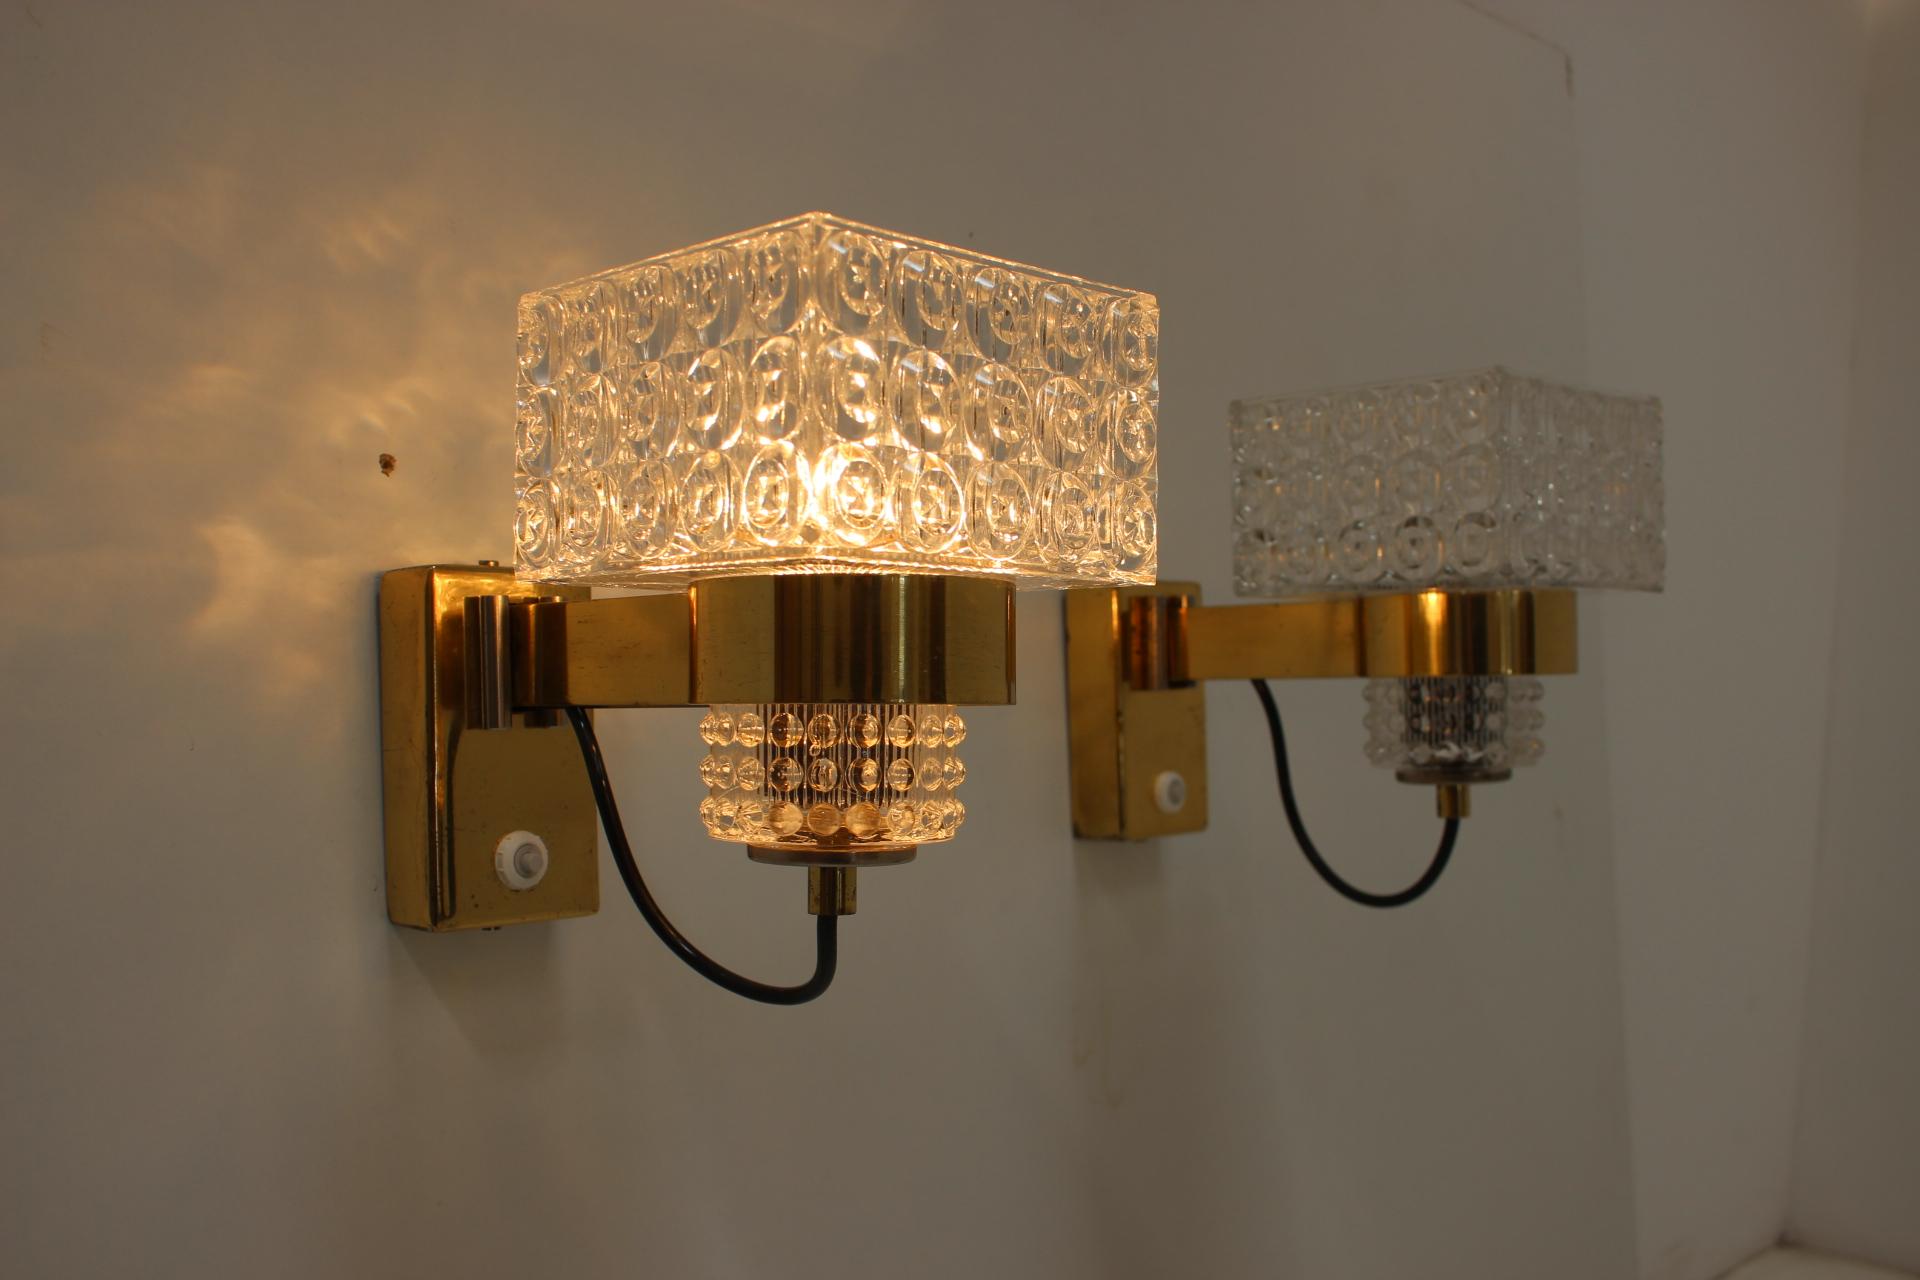 Set of Two Midcentury Wall Lamps Lidokov, 1970s For Sale 6